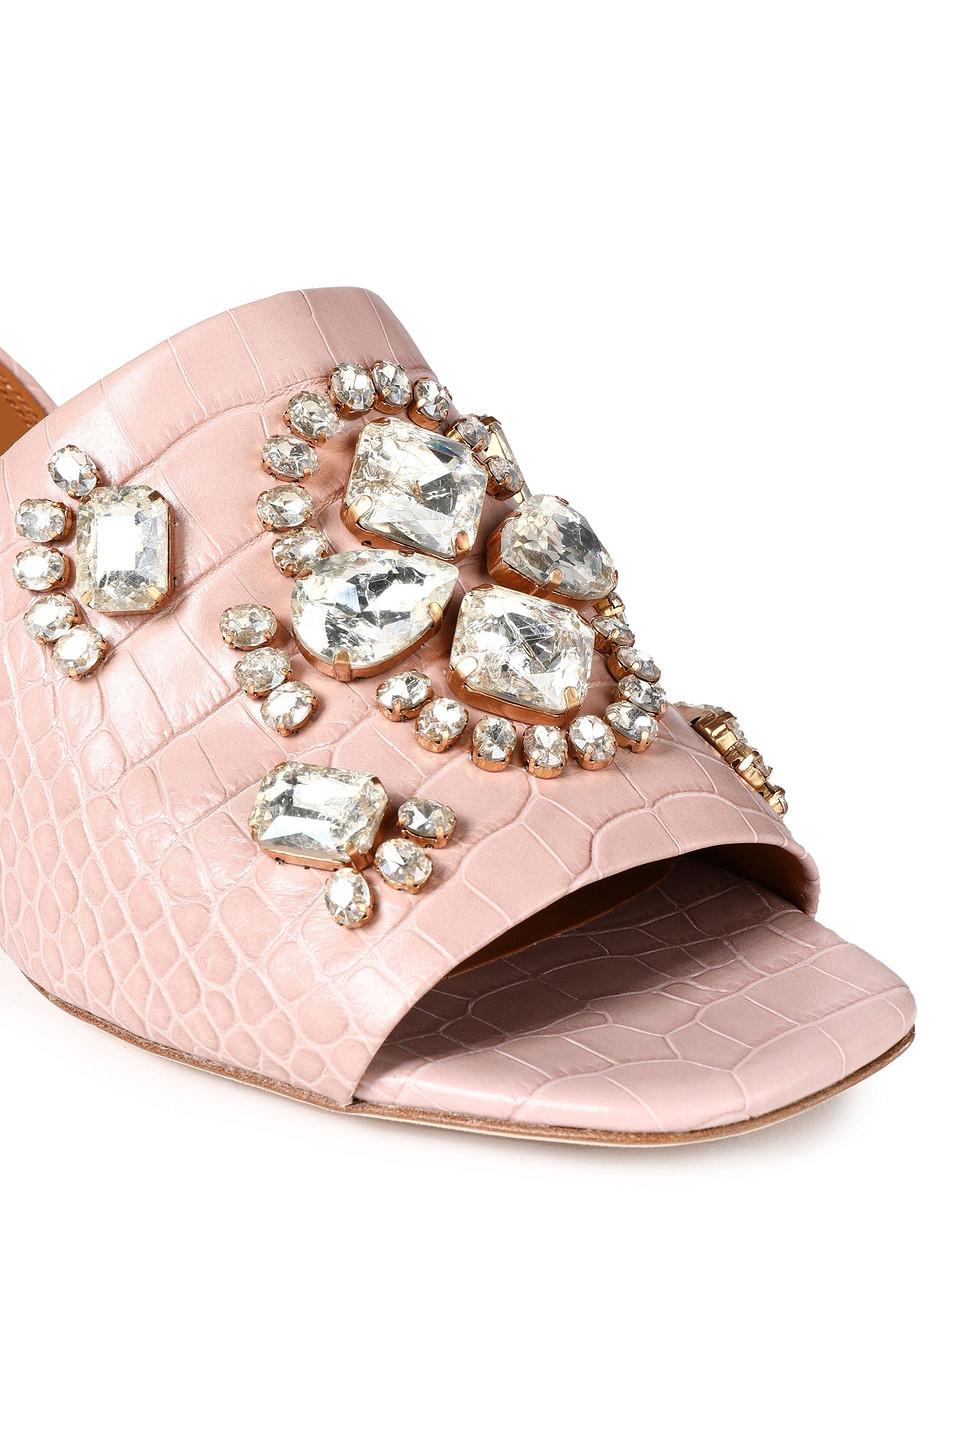 Tory Burch Ines Embellished Croc-effect Leather Mules in Blush 